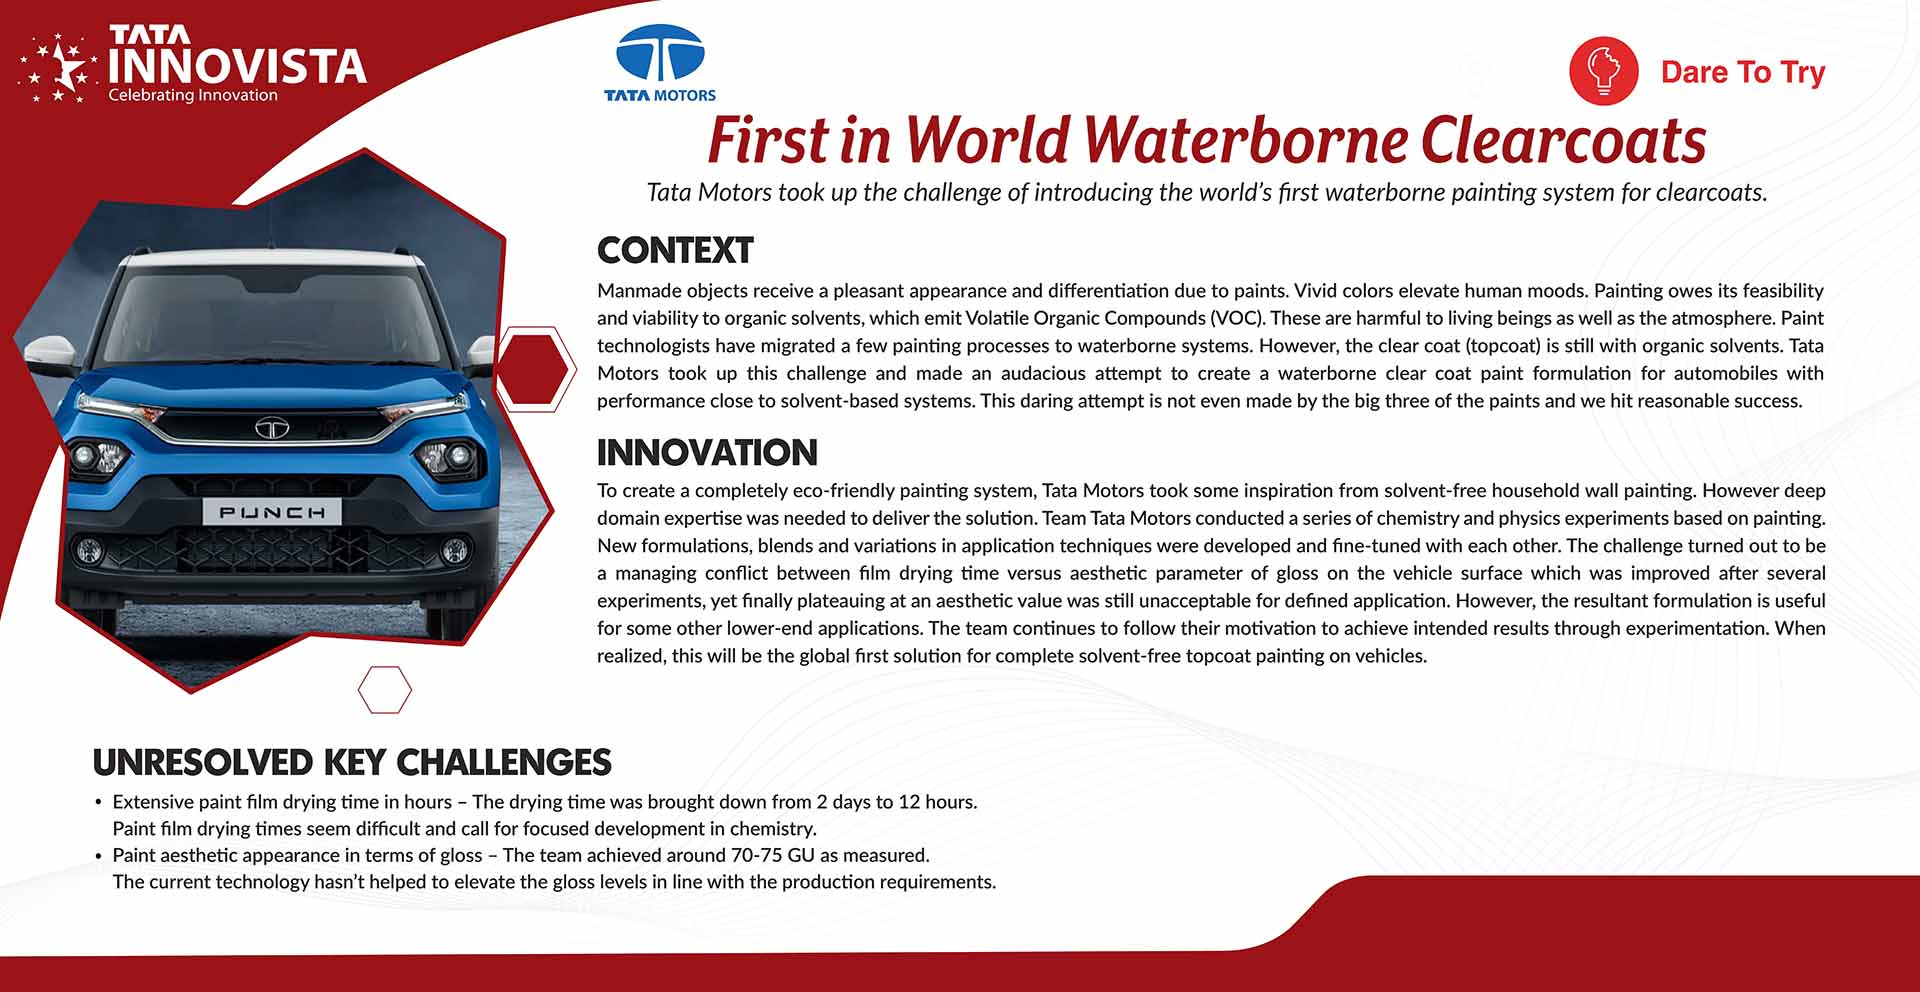 First in World Waterborne Clearcoats